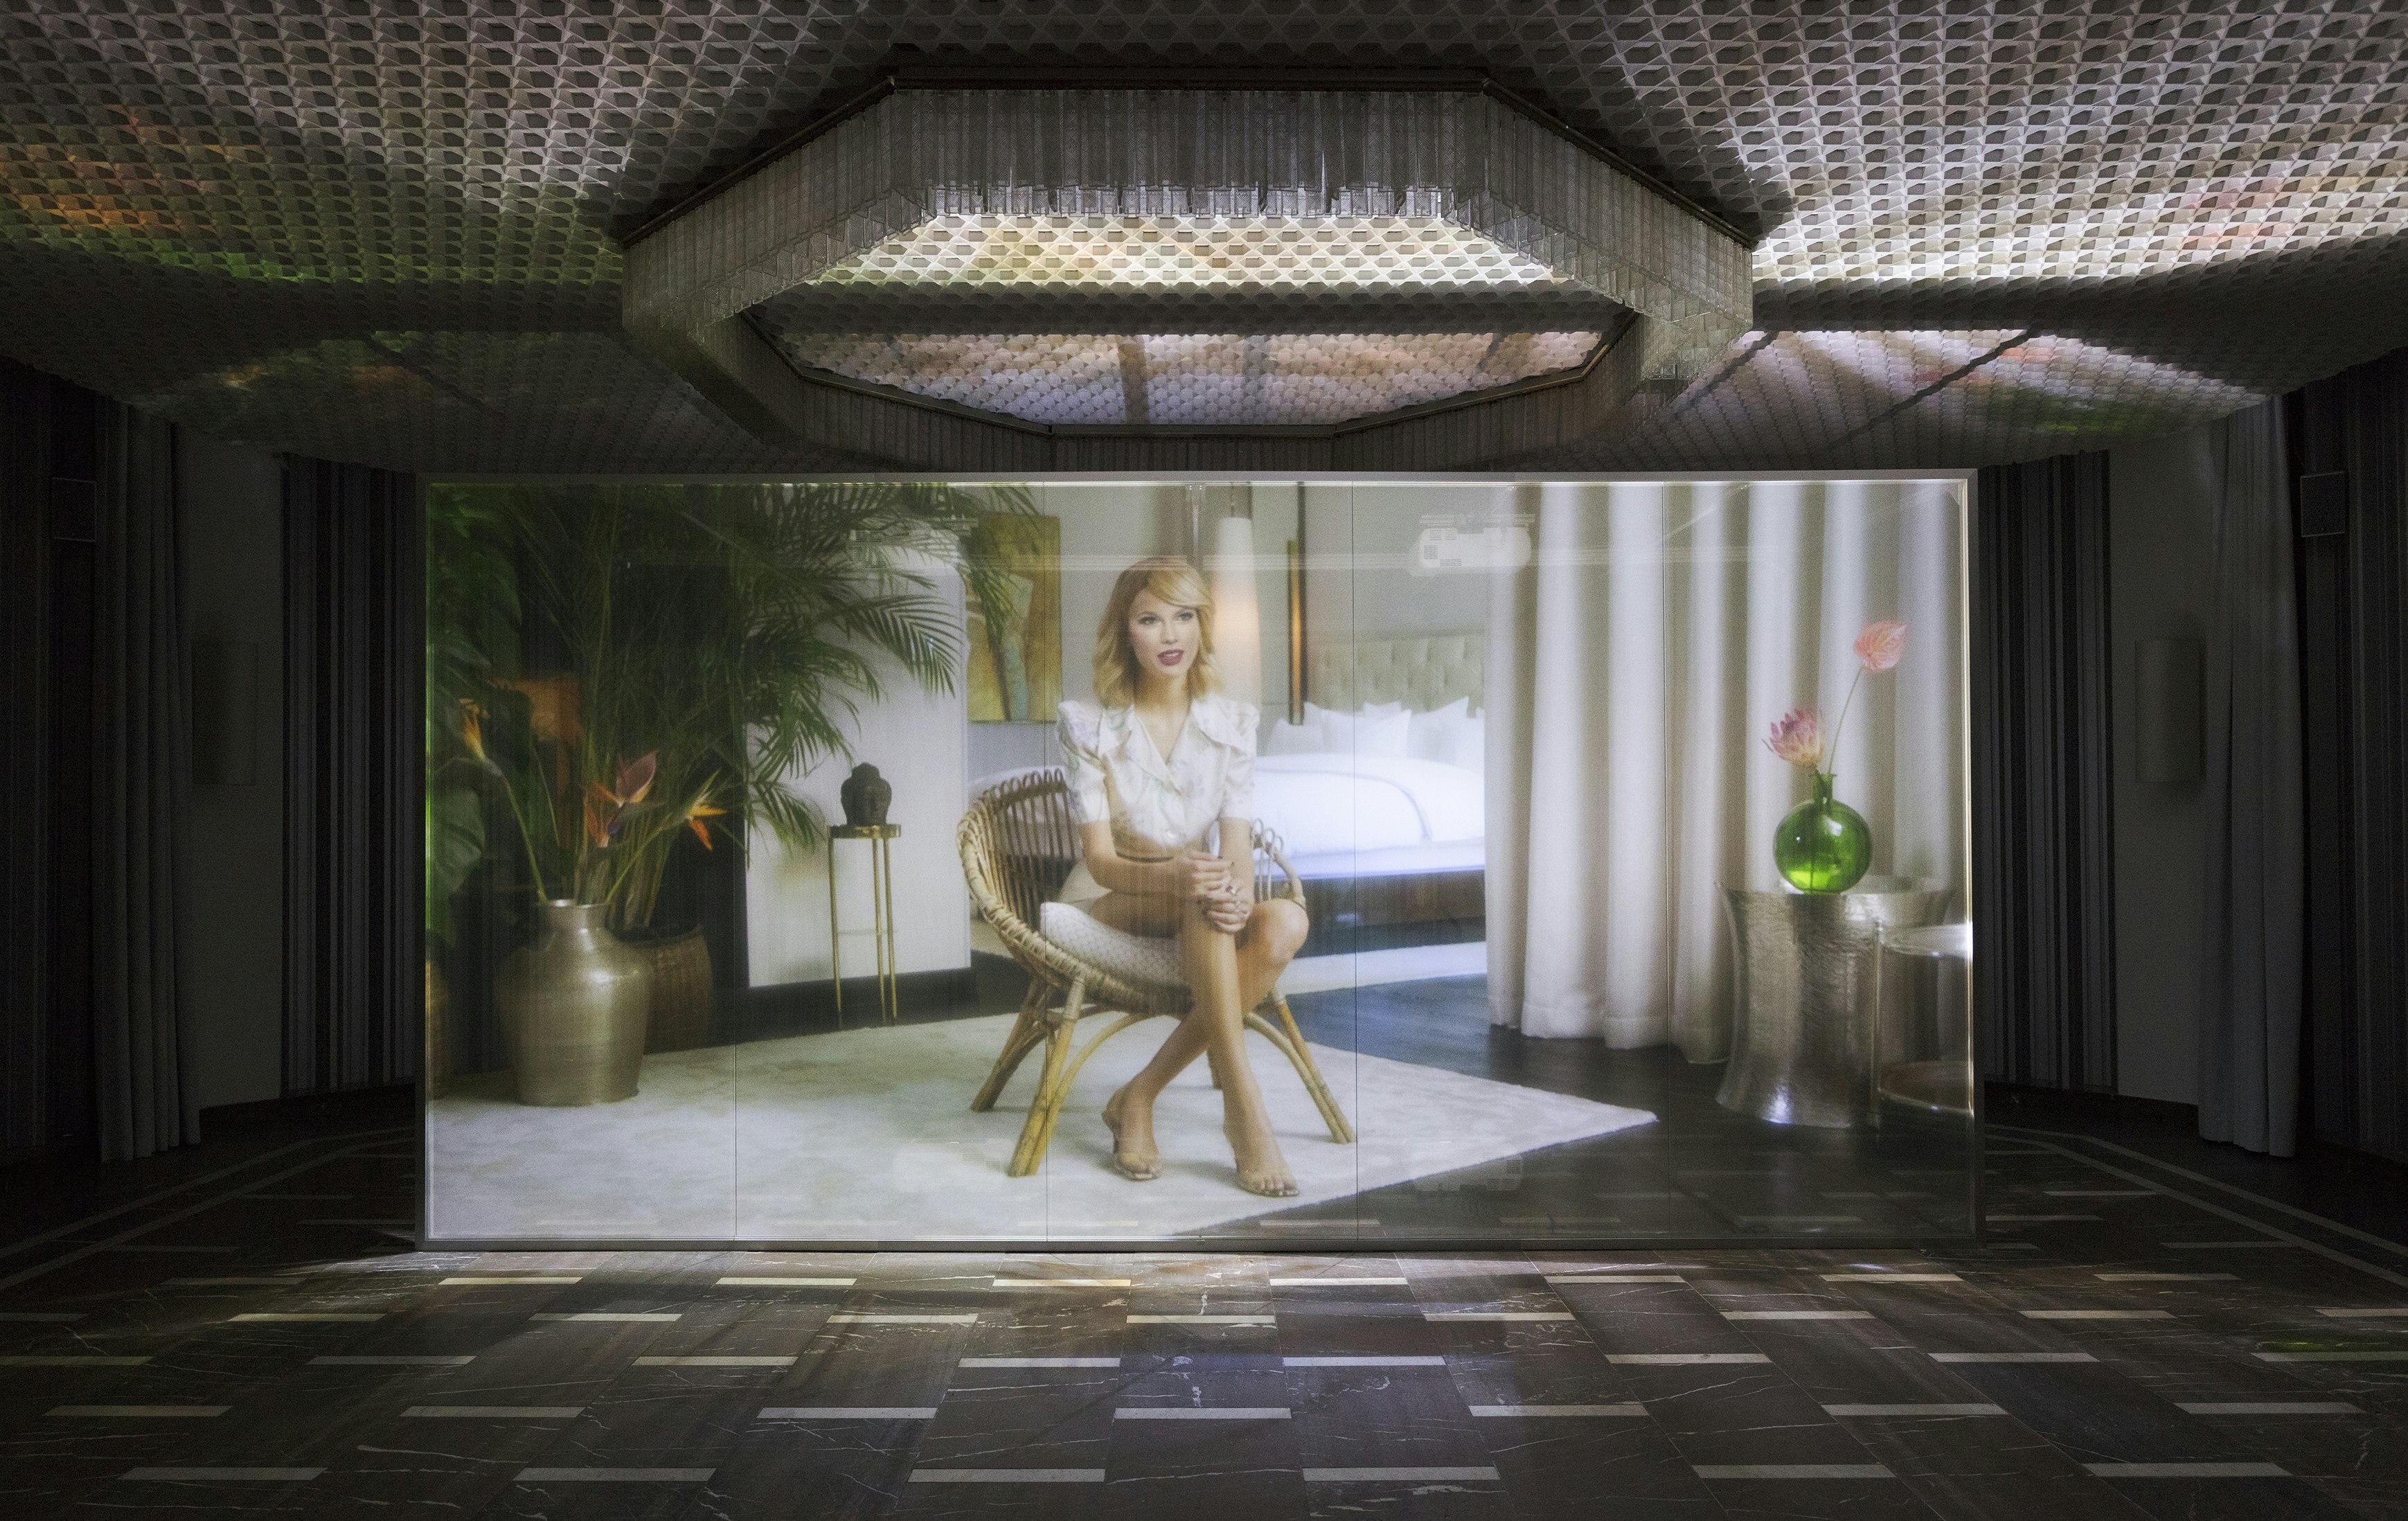 A digitally generated projection of a blonde Caucasian woman closely resembling popstar Taylor Swift, sitting cross legged in a rattan chair, surrounded by potted plants. This image is projected onto a large transparent screen in a darkly lit exhibition space.